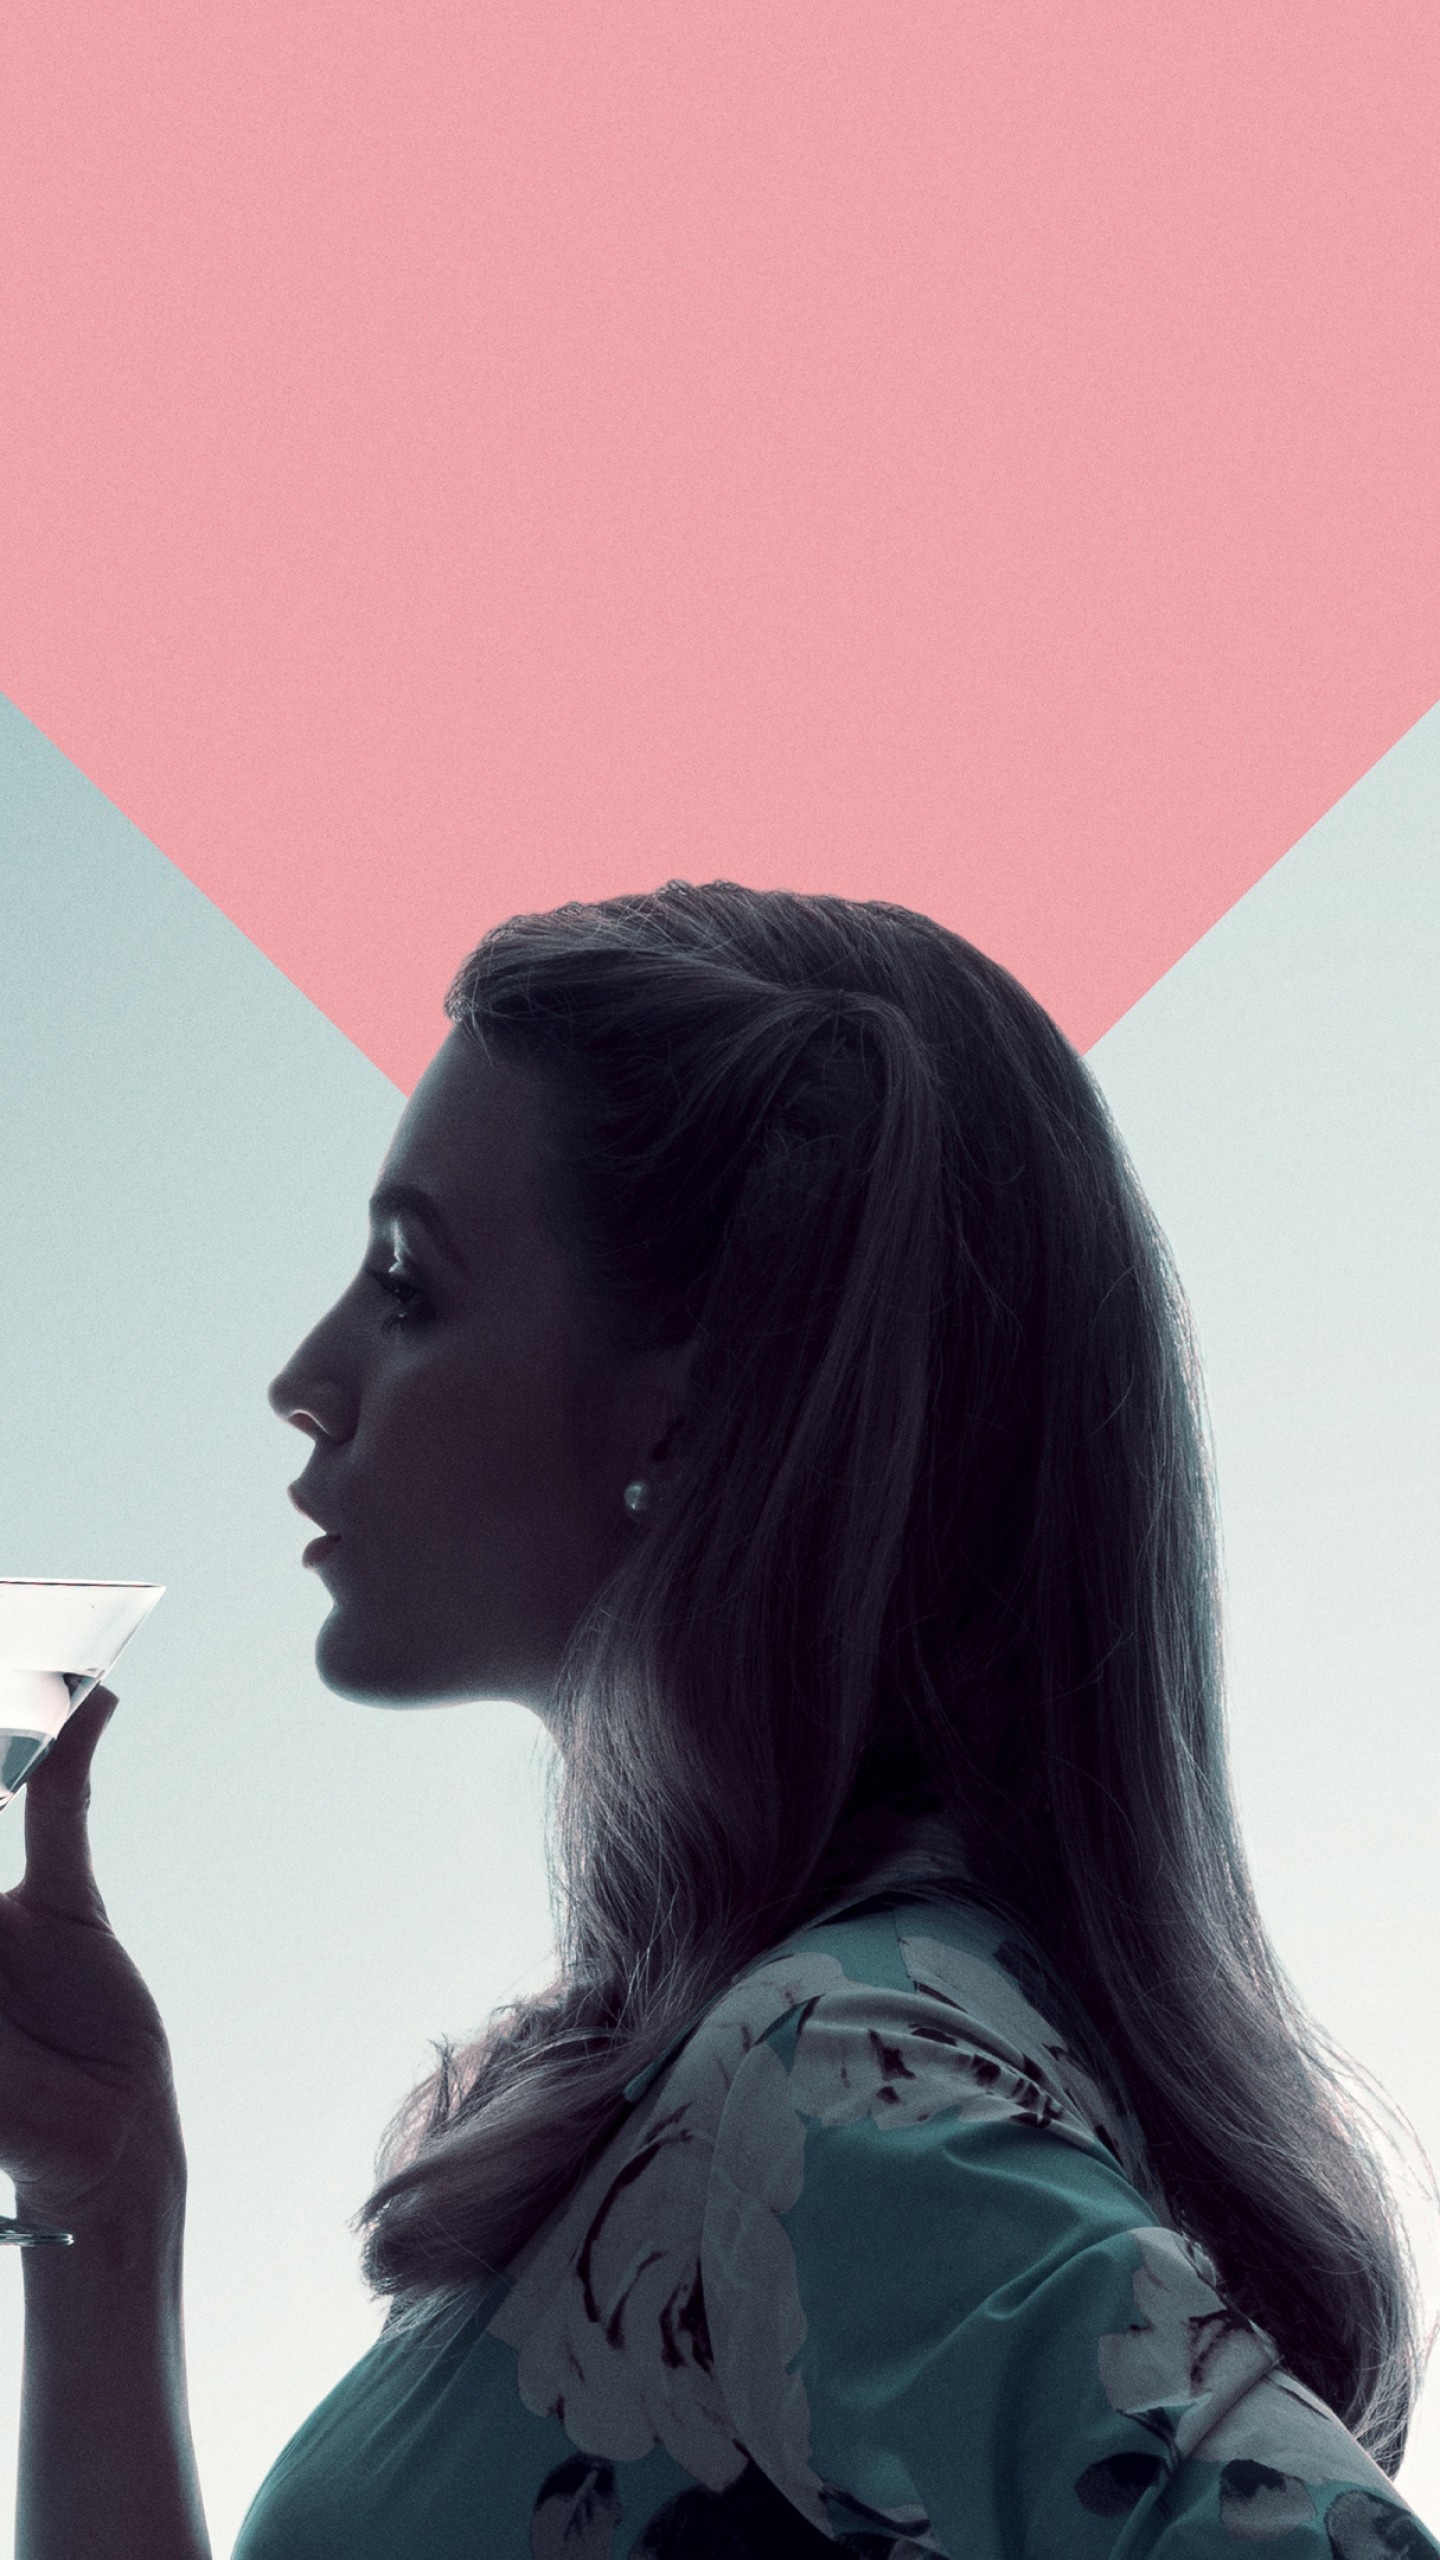 Blake Lively: Starred opposite Anna Kendrick in the box-office hit A Simple Favor (2018). 1440x2560 HD Wallpaper.